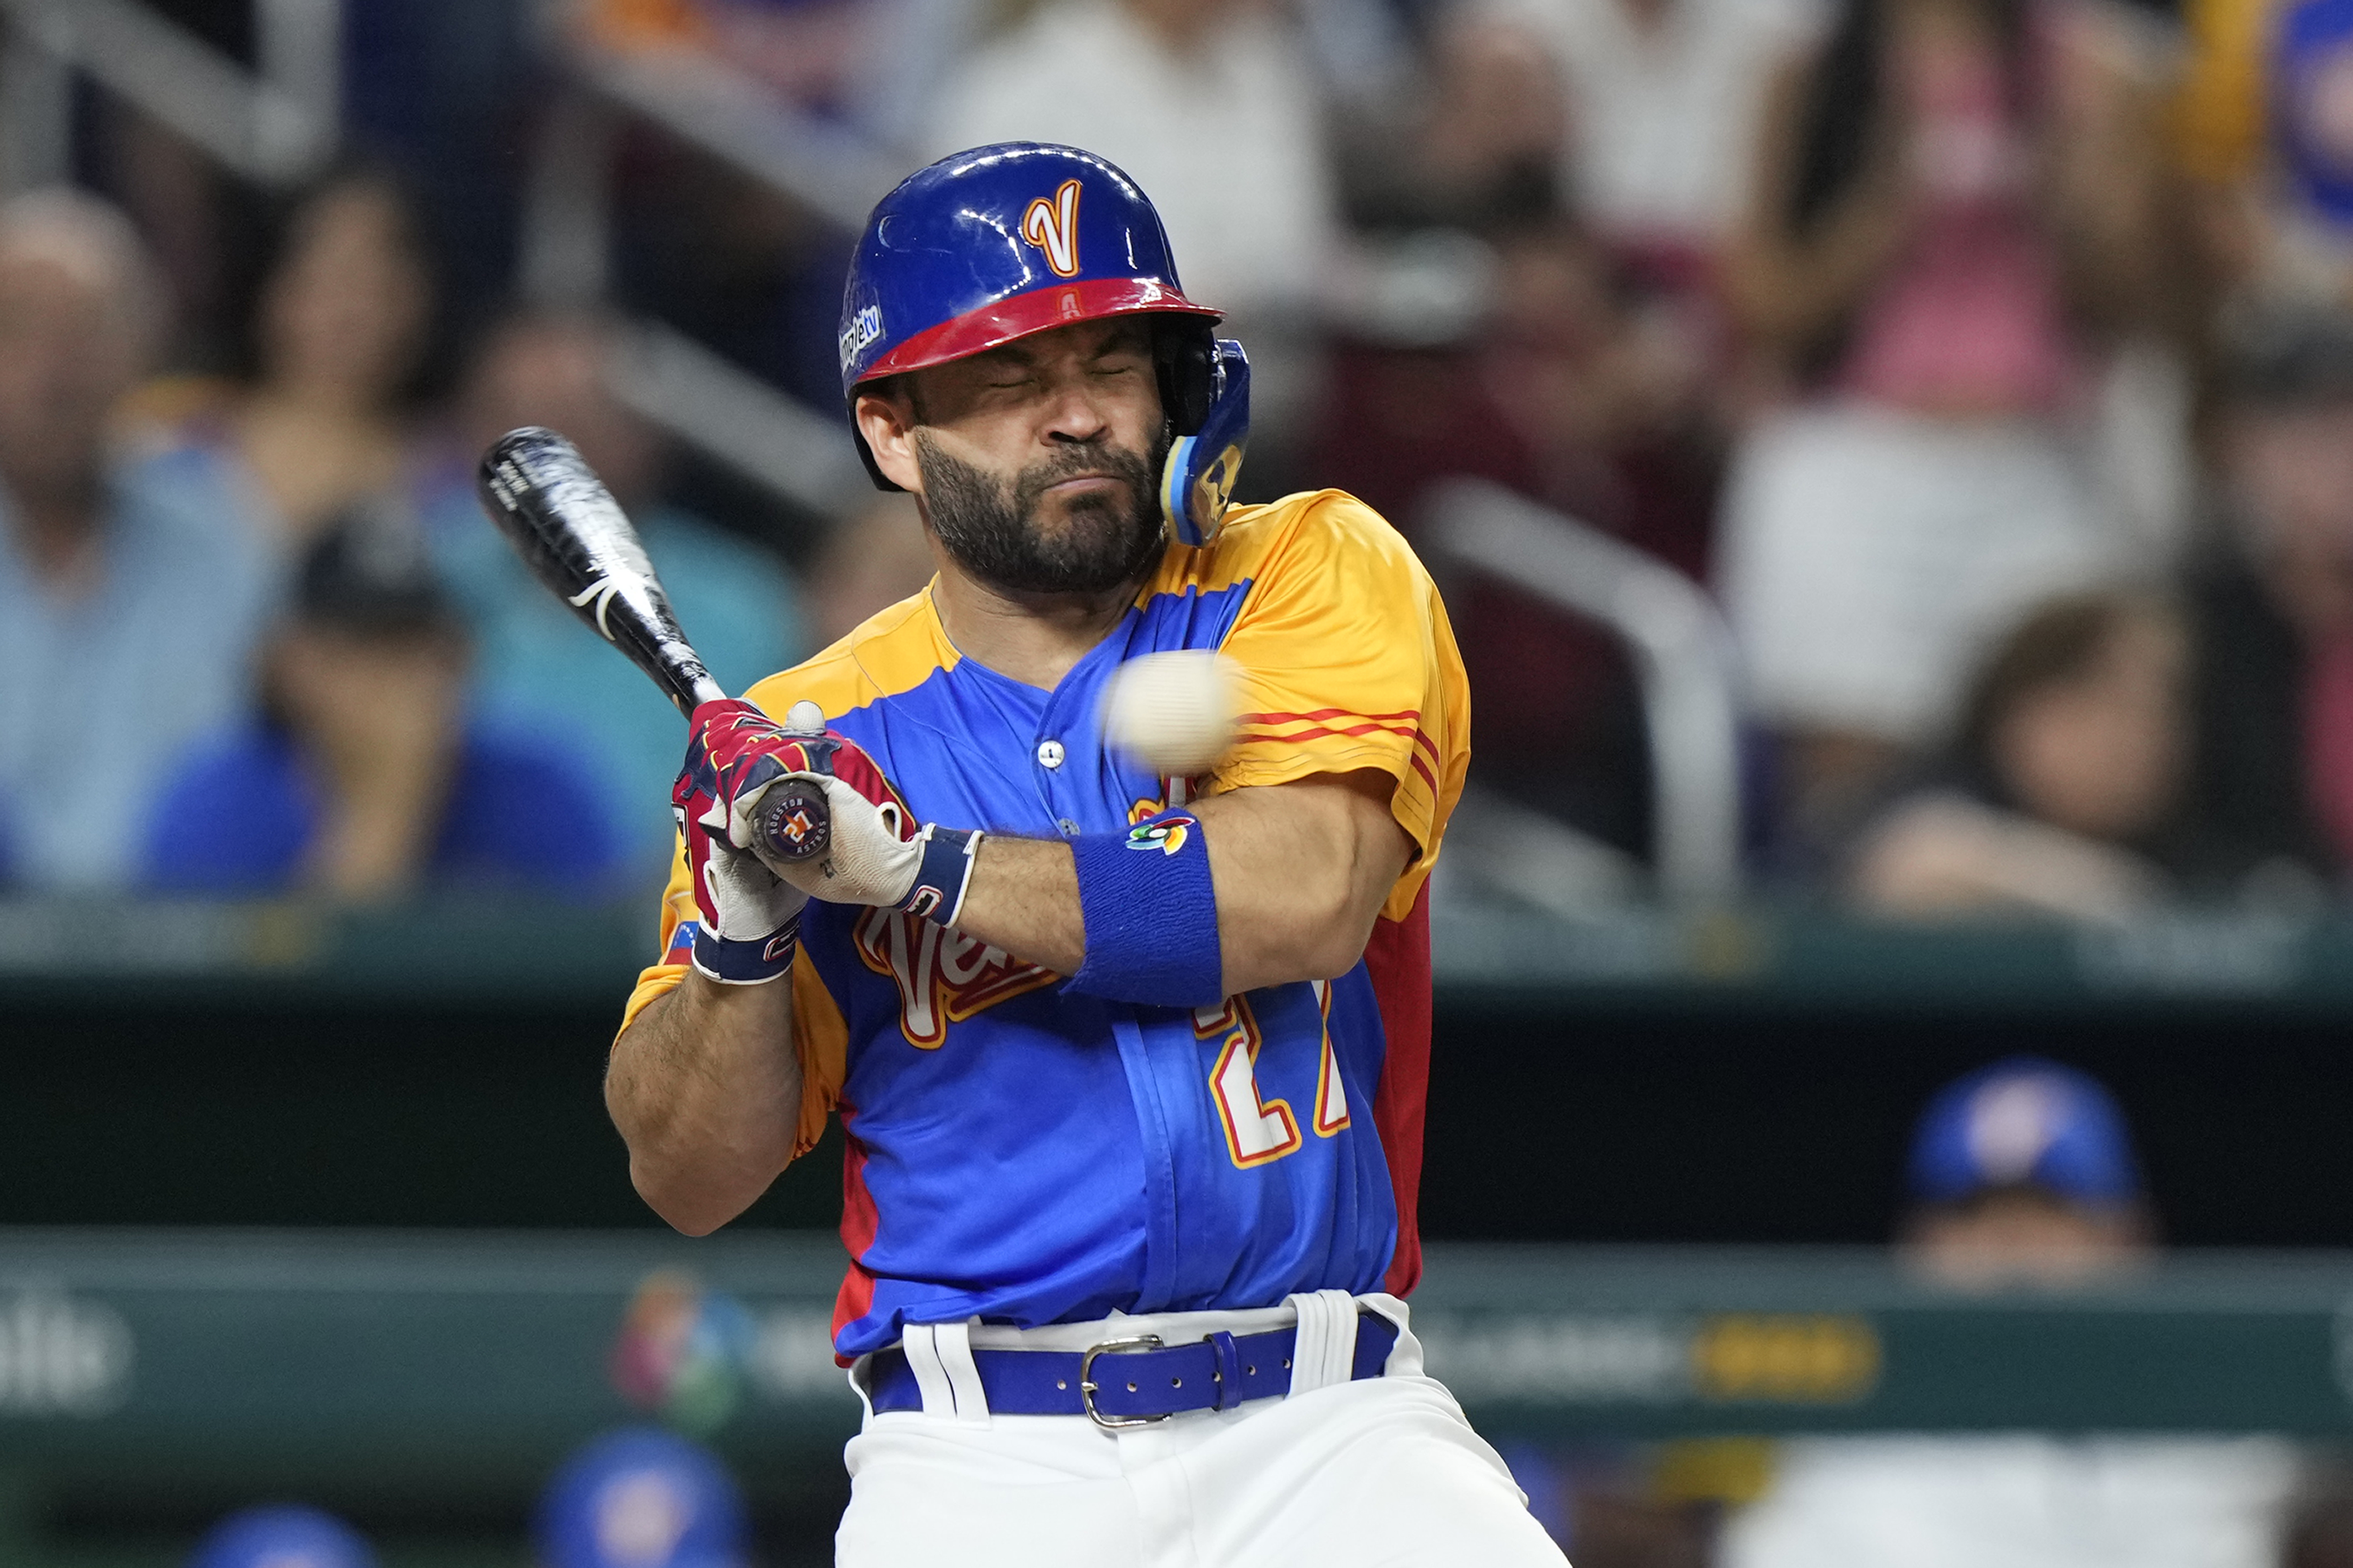 Astros' Altuve leaves WBC game after hit on hand by a pitch